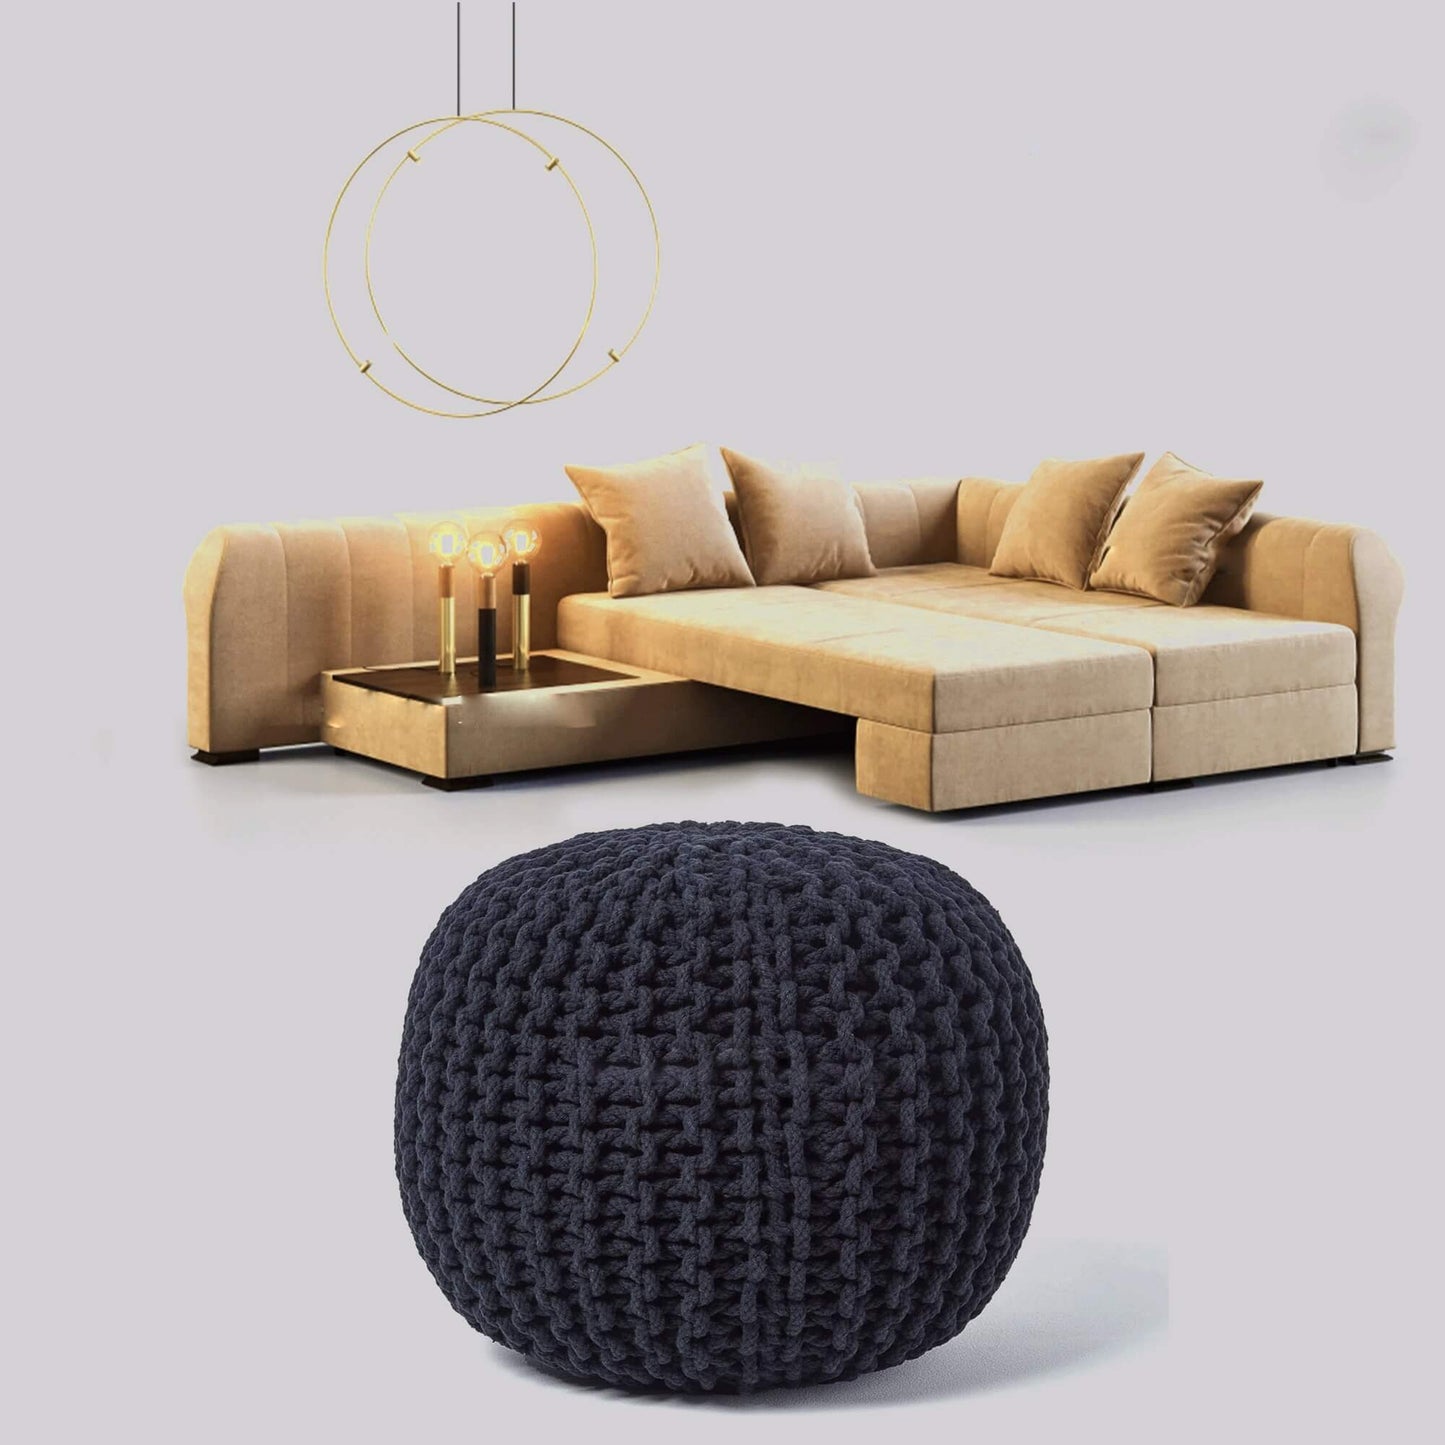 Knitted Pouffe & Footstool Round Large Moroccan Knitted 50CM - TheComfortshop.co.ukFurniture0721718971511thecomfortshopTheComfortshop.co.ukBlack Knitted PoufBlackKnitted Pouffe & Footstool Round Large Moroccan Knitted 50CM - TheComfortshop.co.uk